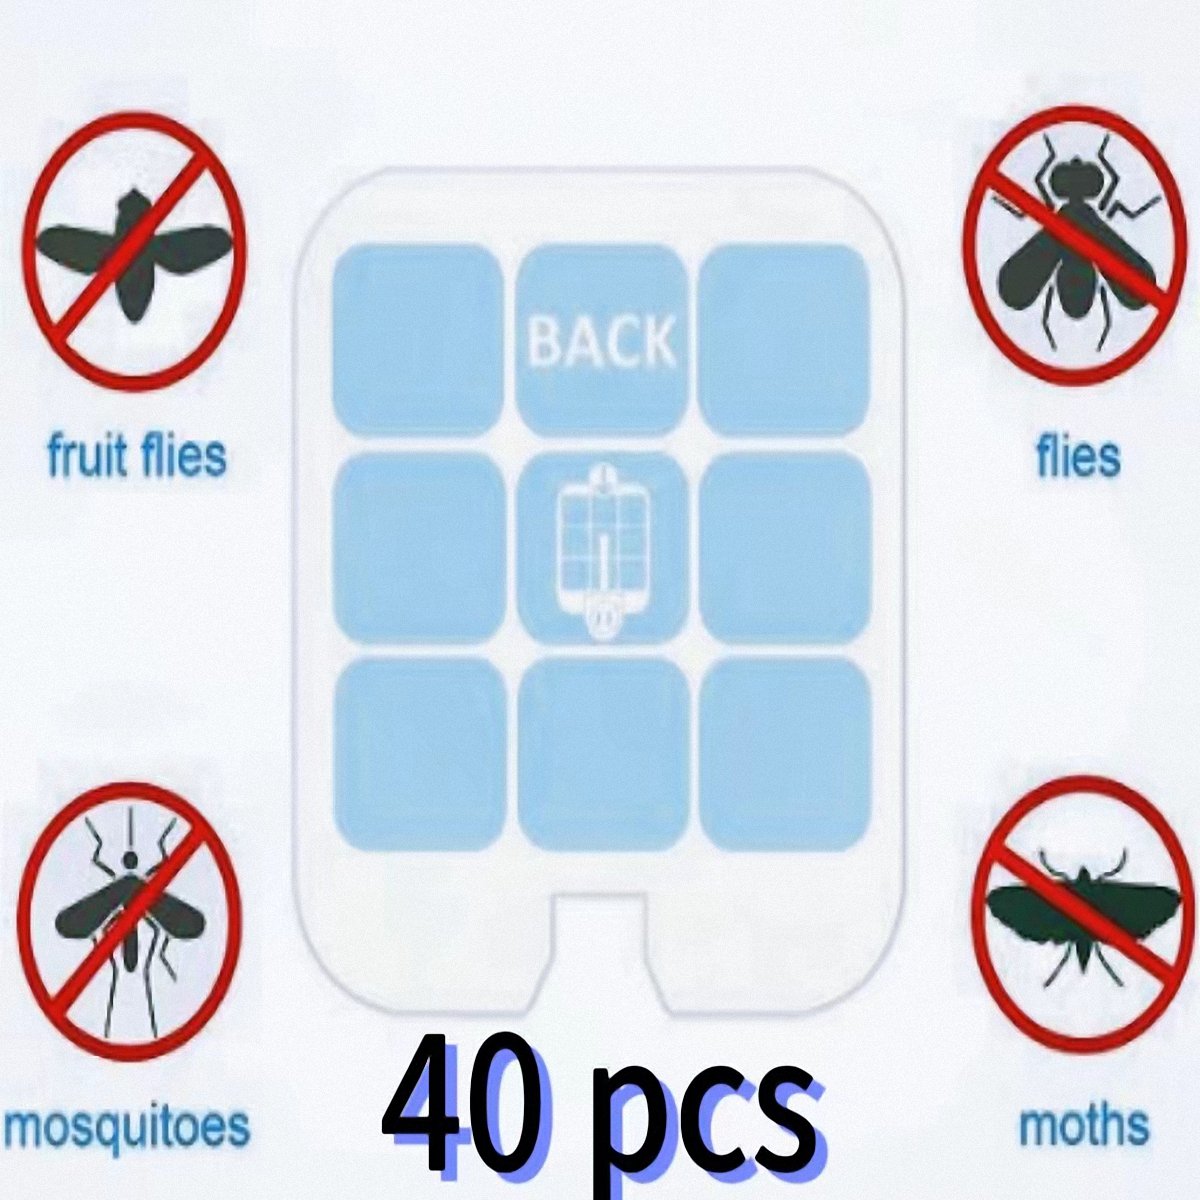 Safer Home Indoor Plug-in Fly Trap REFILL Pack of Glue Cards for